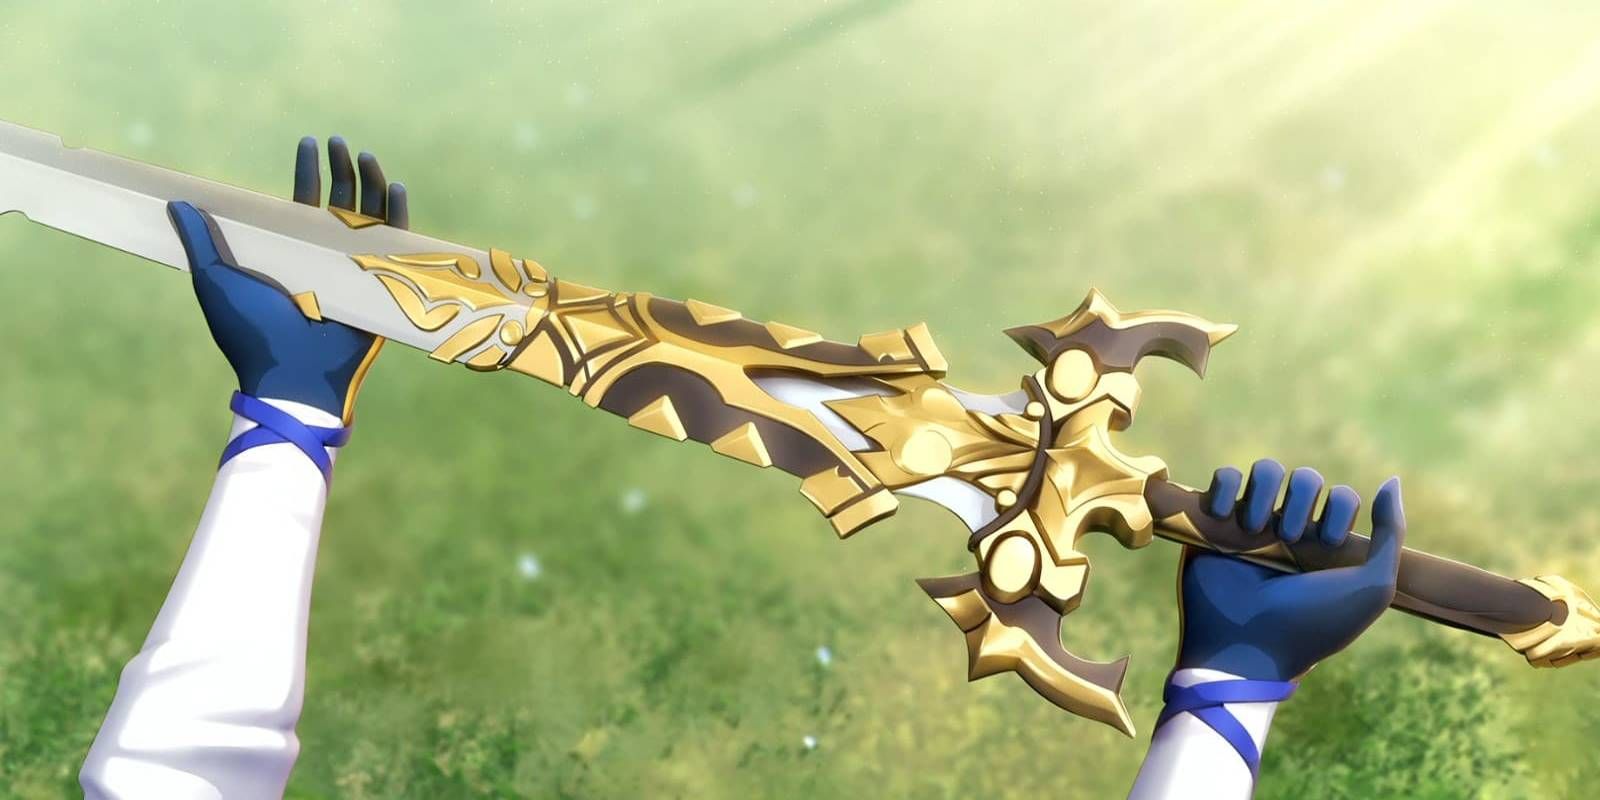 Fire Emblem Engage Alear's Divine Dragon Sword Used as Part of Unique Custom Advanced Class When Progressed Further into Game's Story